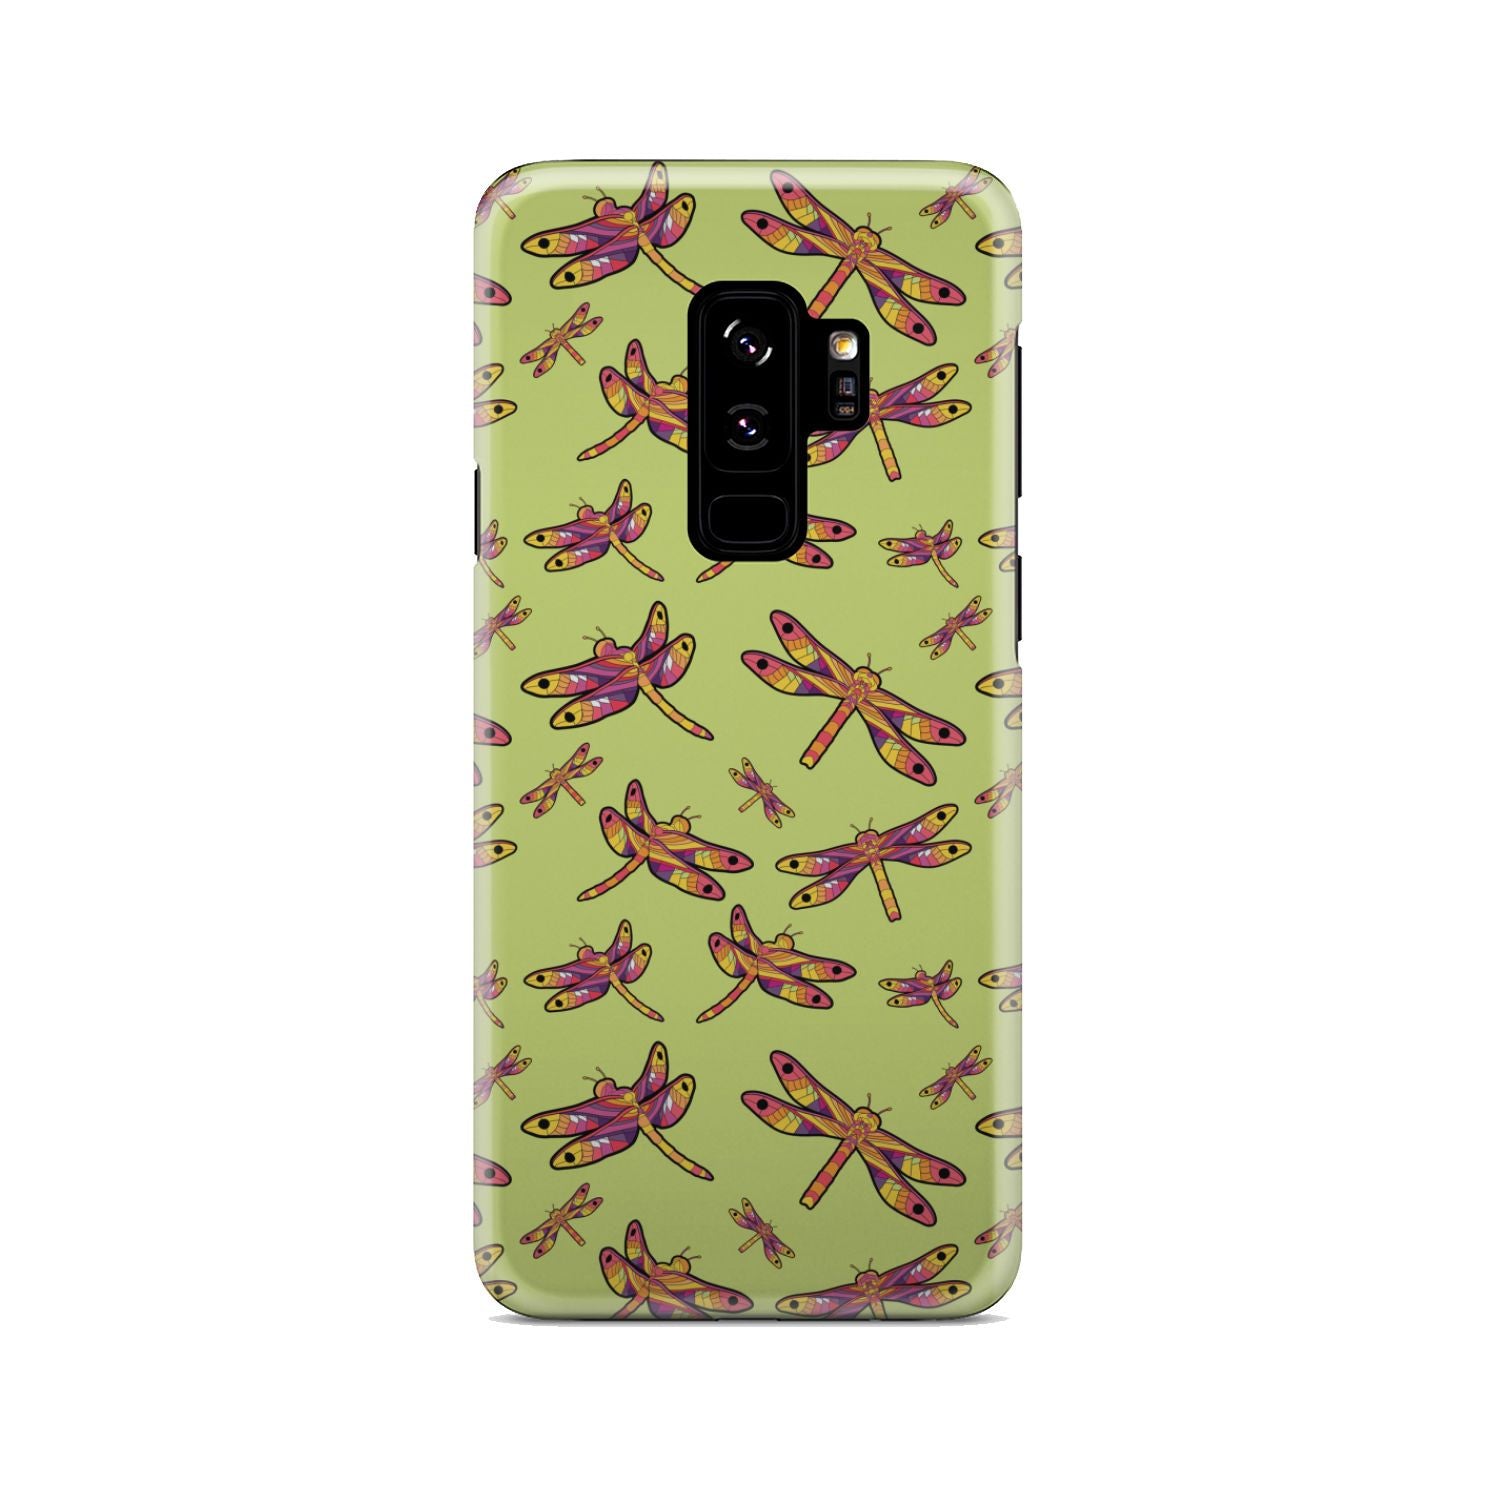 Gathering Lime Phone Case Phone Case wc-fulfillment Samsung Galaxy S9 Plus 